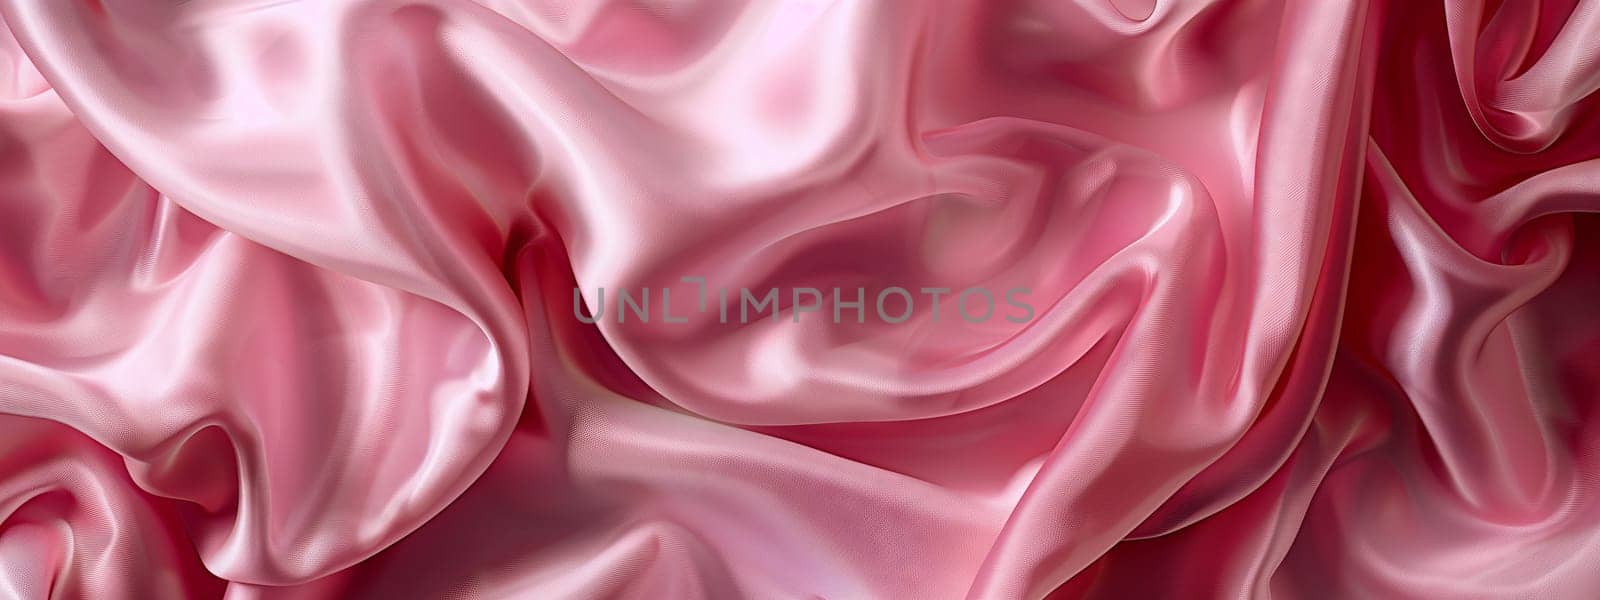 A close up of a liquid pink satin fabric with waves creating a beautiful pattern reminiscent of a painting. The hues range from purple to magenta, with touches of violet and carmine